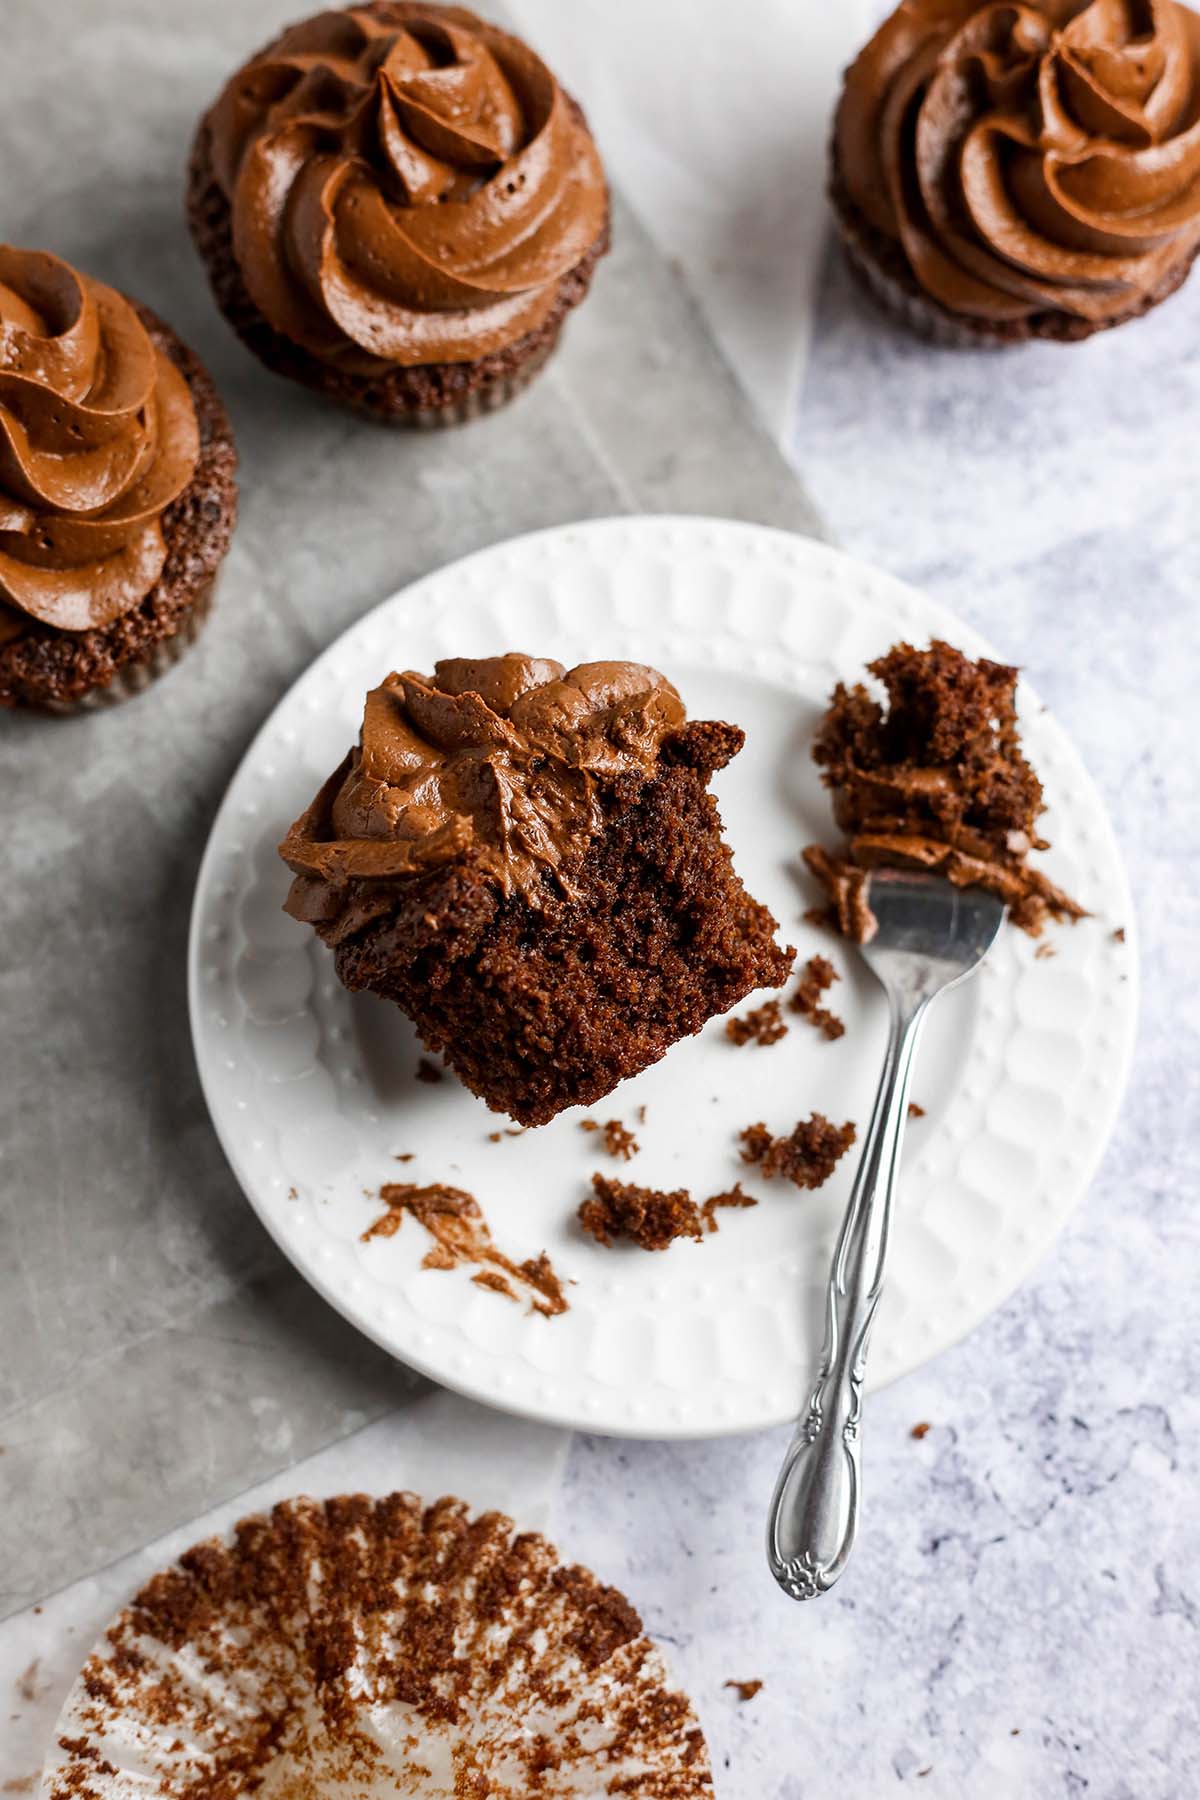 half of a chocolate cupcake with chocolate frosting on a small white plate. A knife is next to the cupcake that is cut in half.